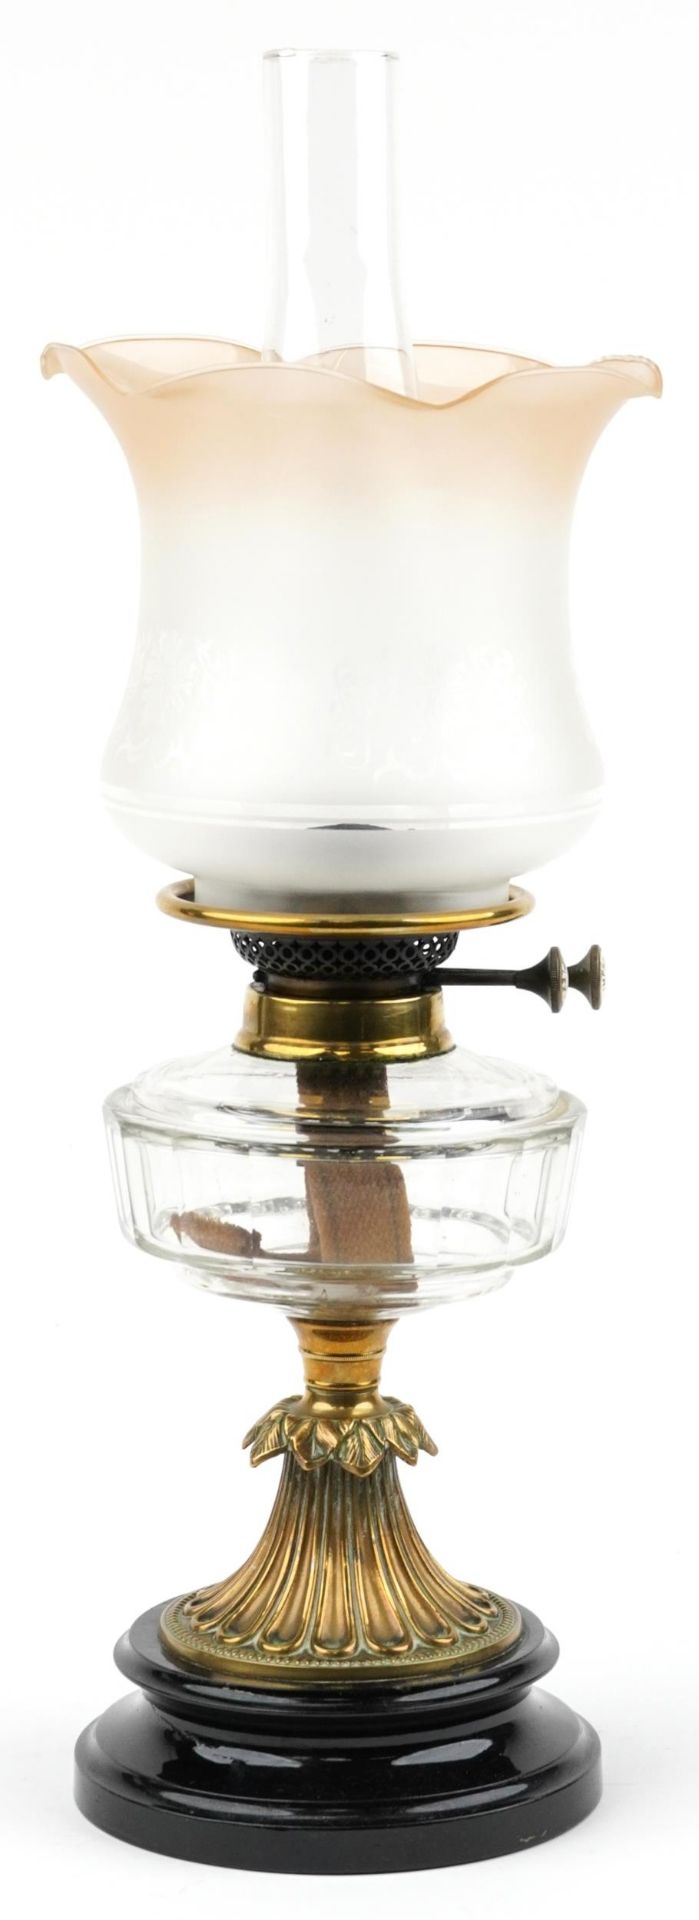 Victorian brass and glass oil lamp with Duplex burner and frosted shade, 55cm high - Image 2 of 3